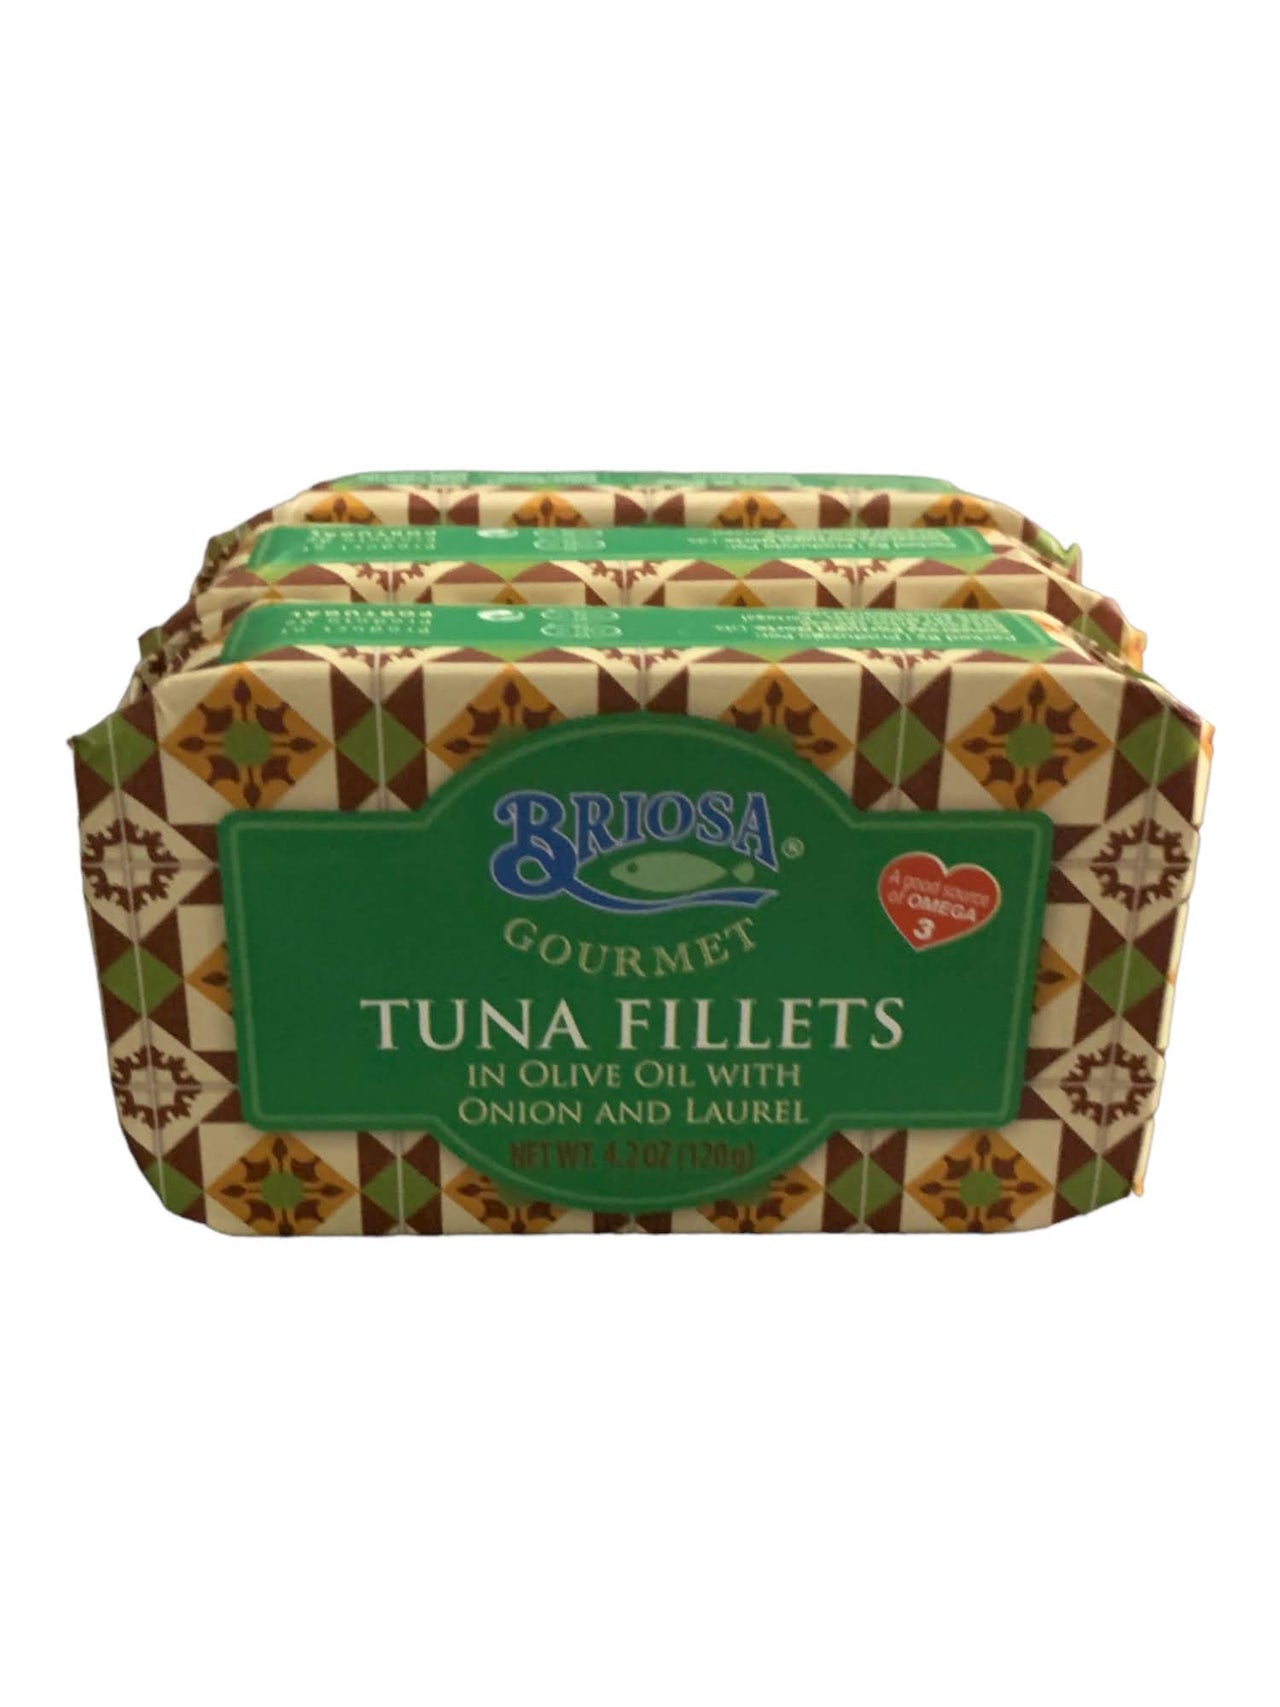 Briosa Gourmet Tuna Fillets in Olive Oil with Onion and Laurel - 3 Pack - TinCanFish